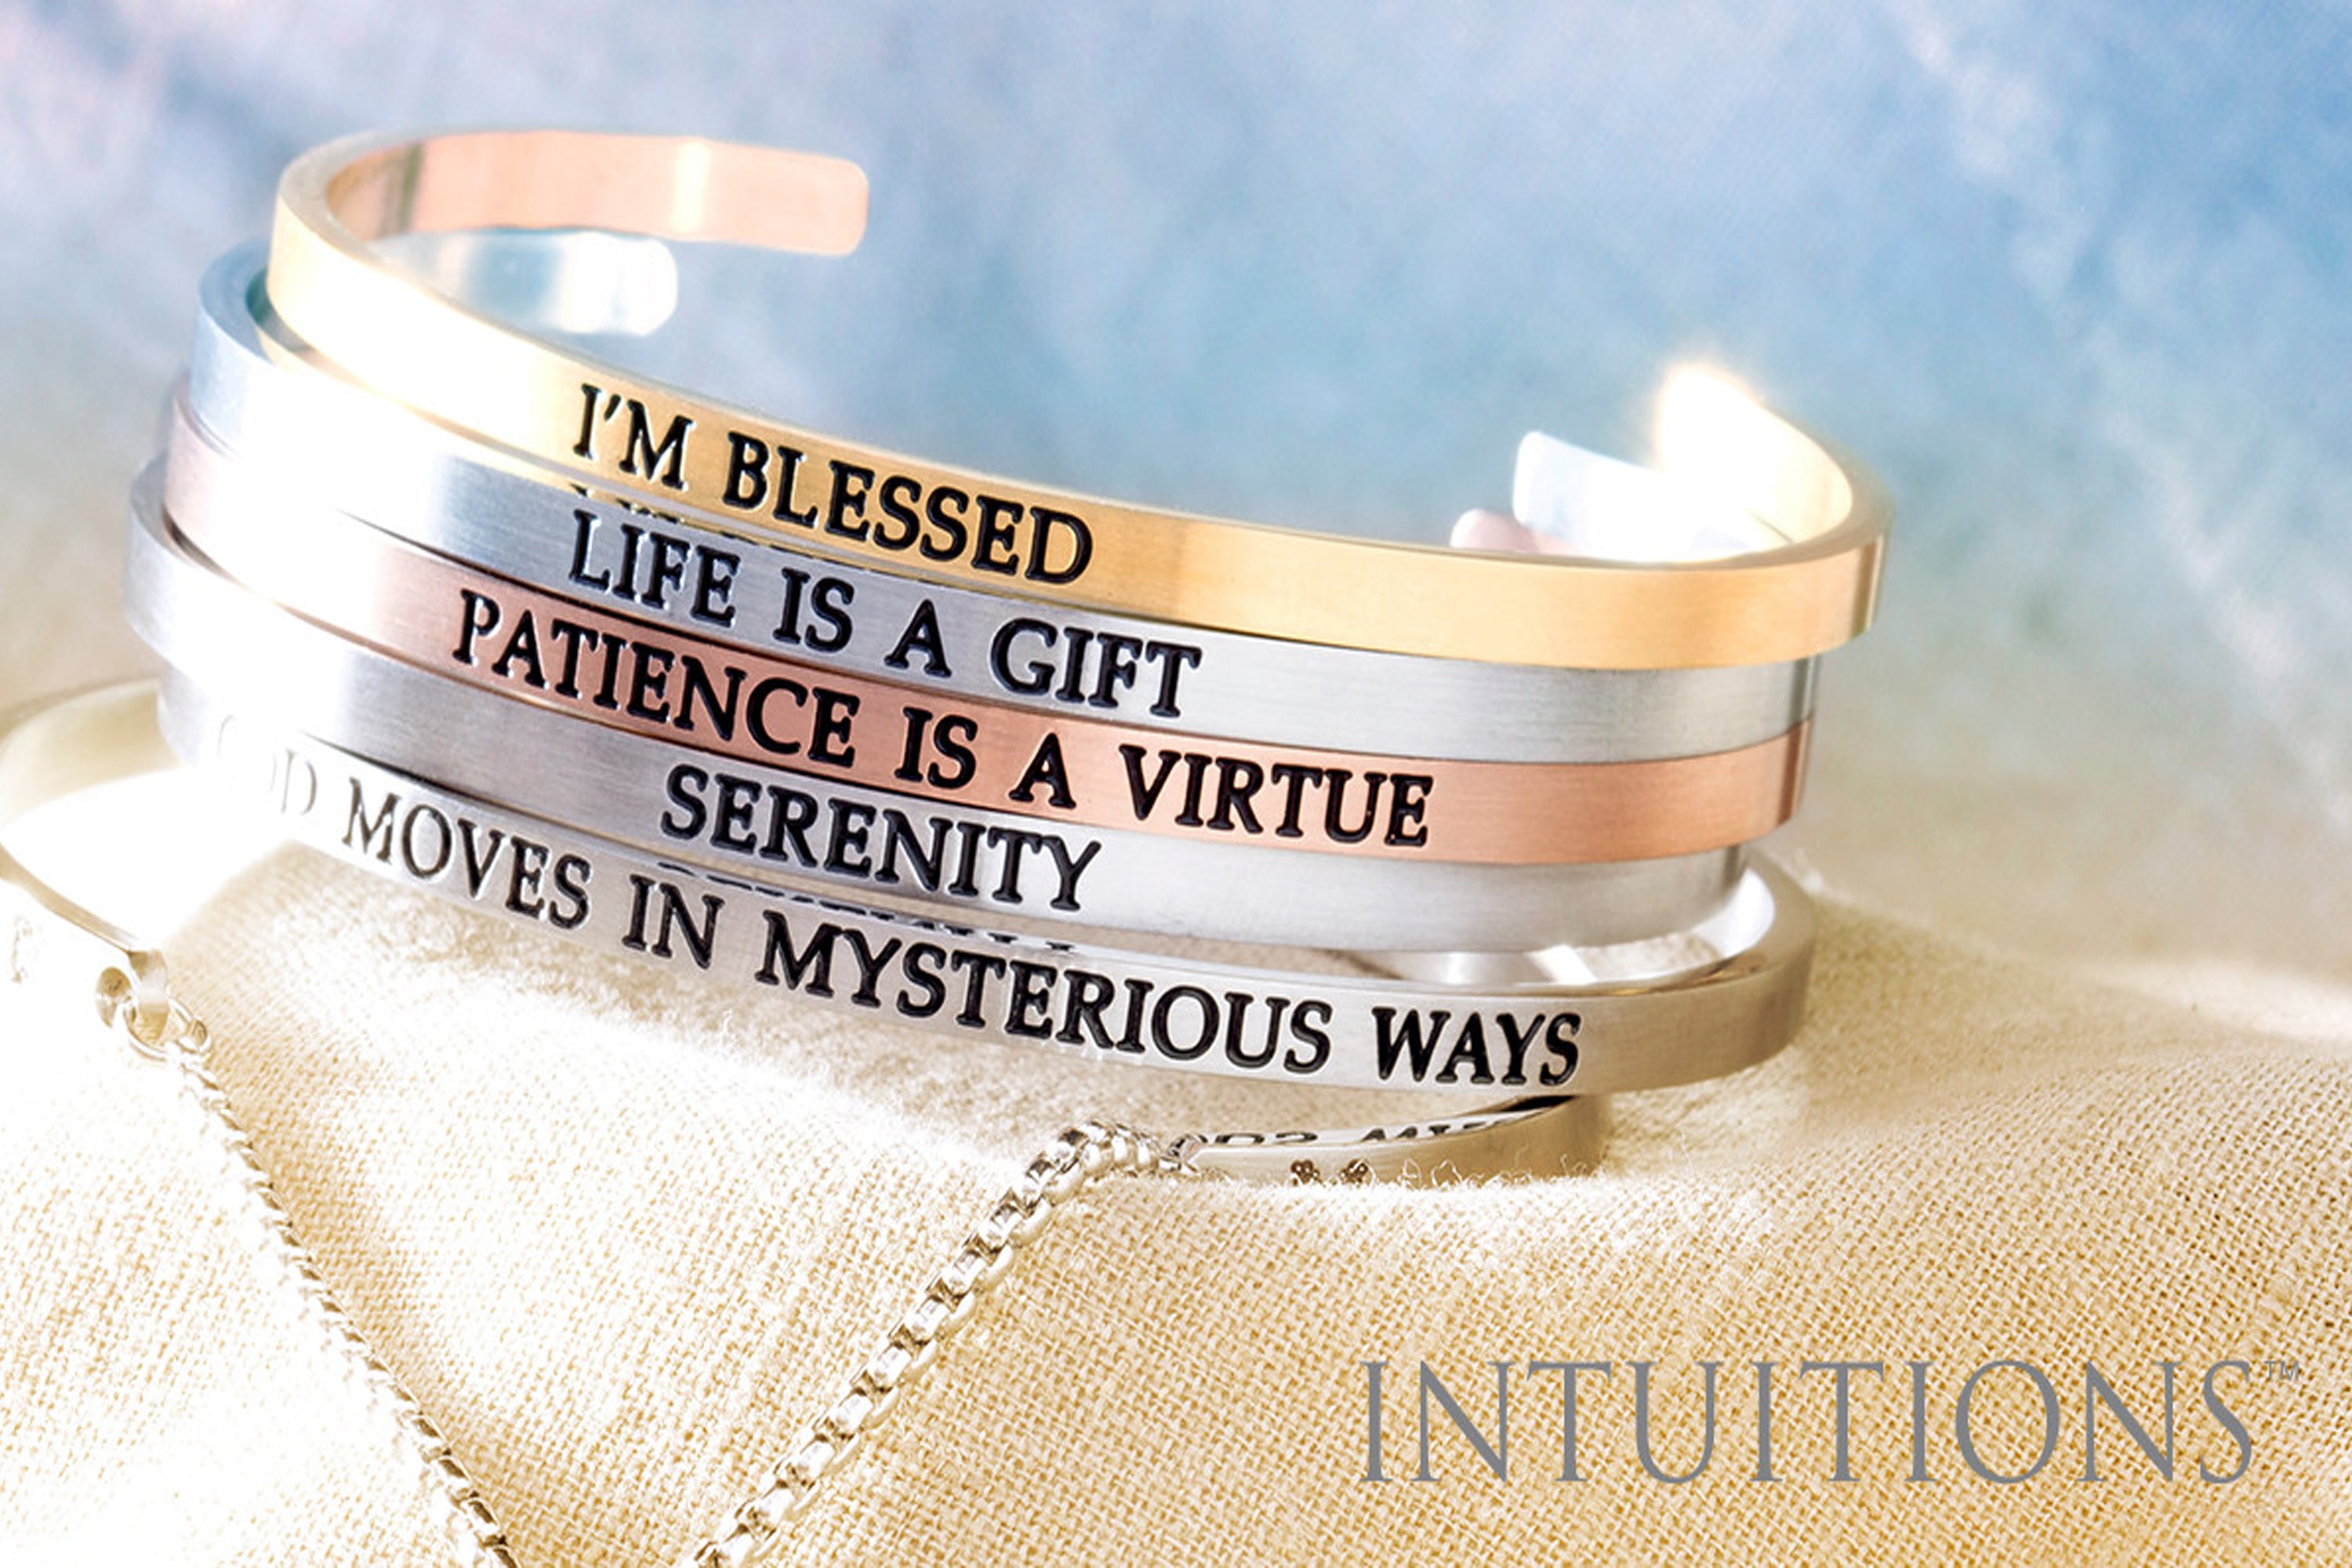 Intuitions Stainless Steel  Love You to the Moon and Back Bangle Bracelet